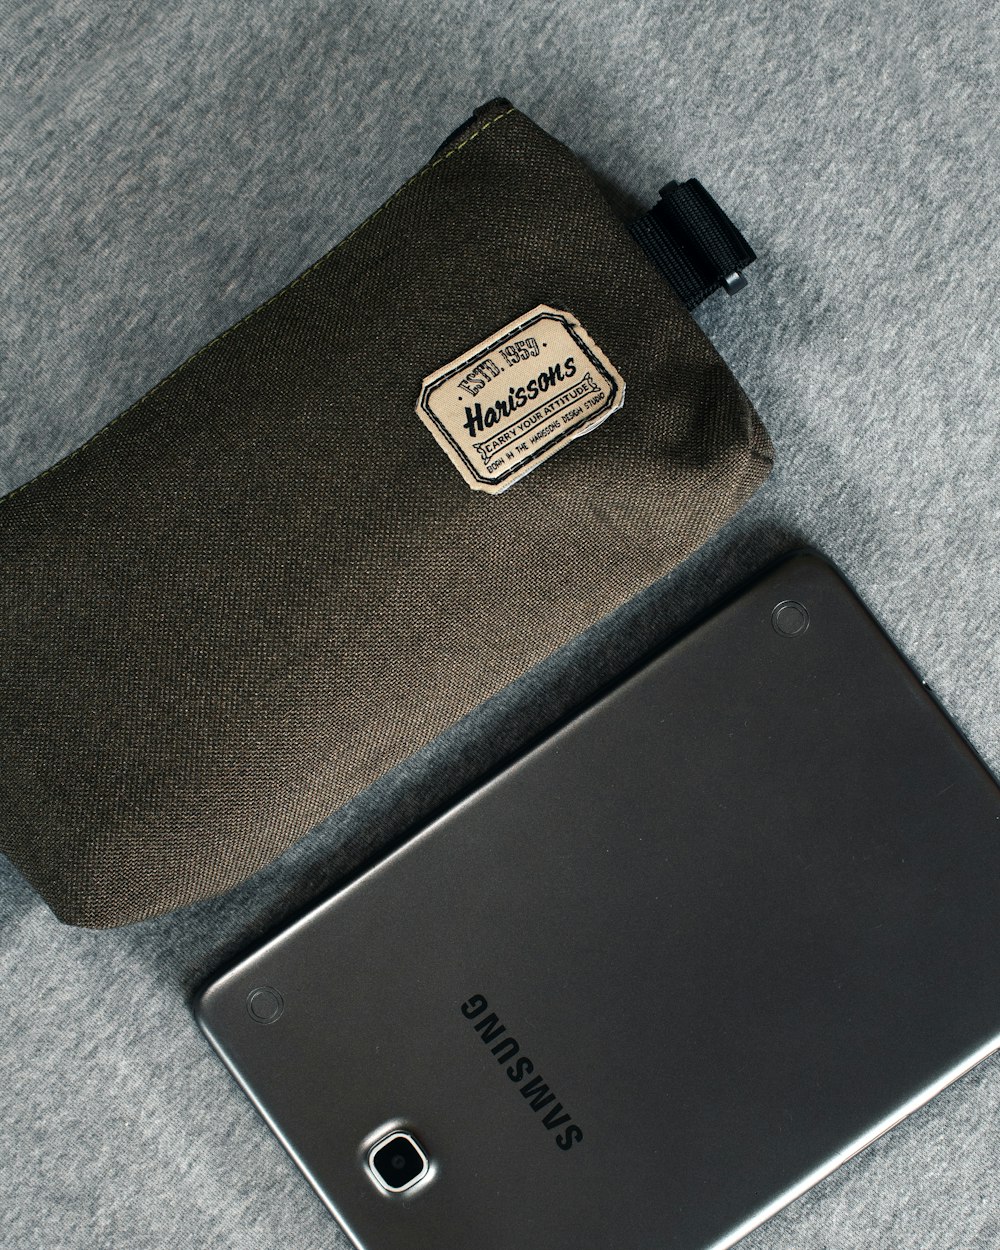 black samsung android smartphone on gray textile